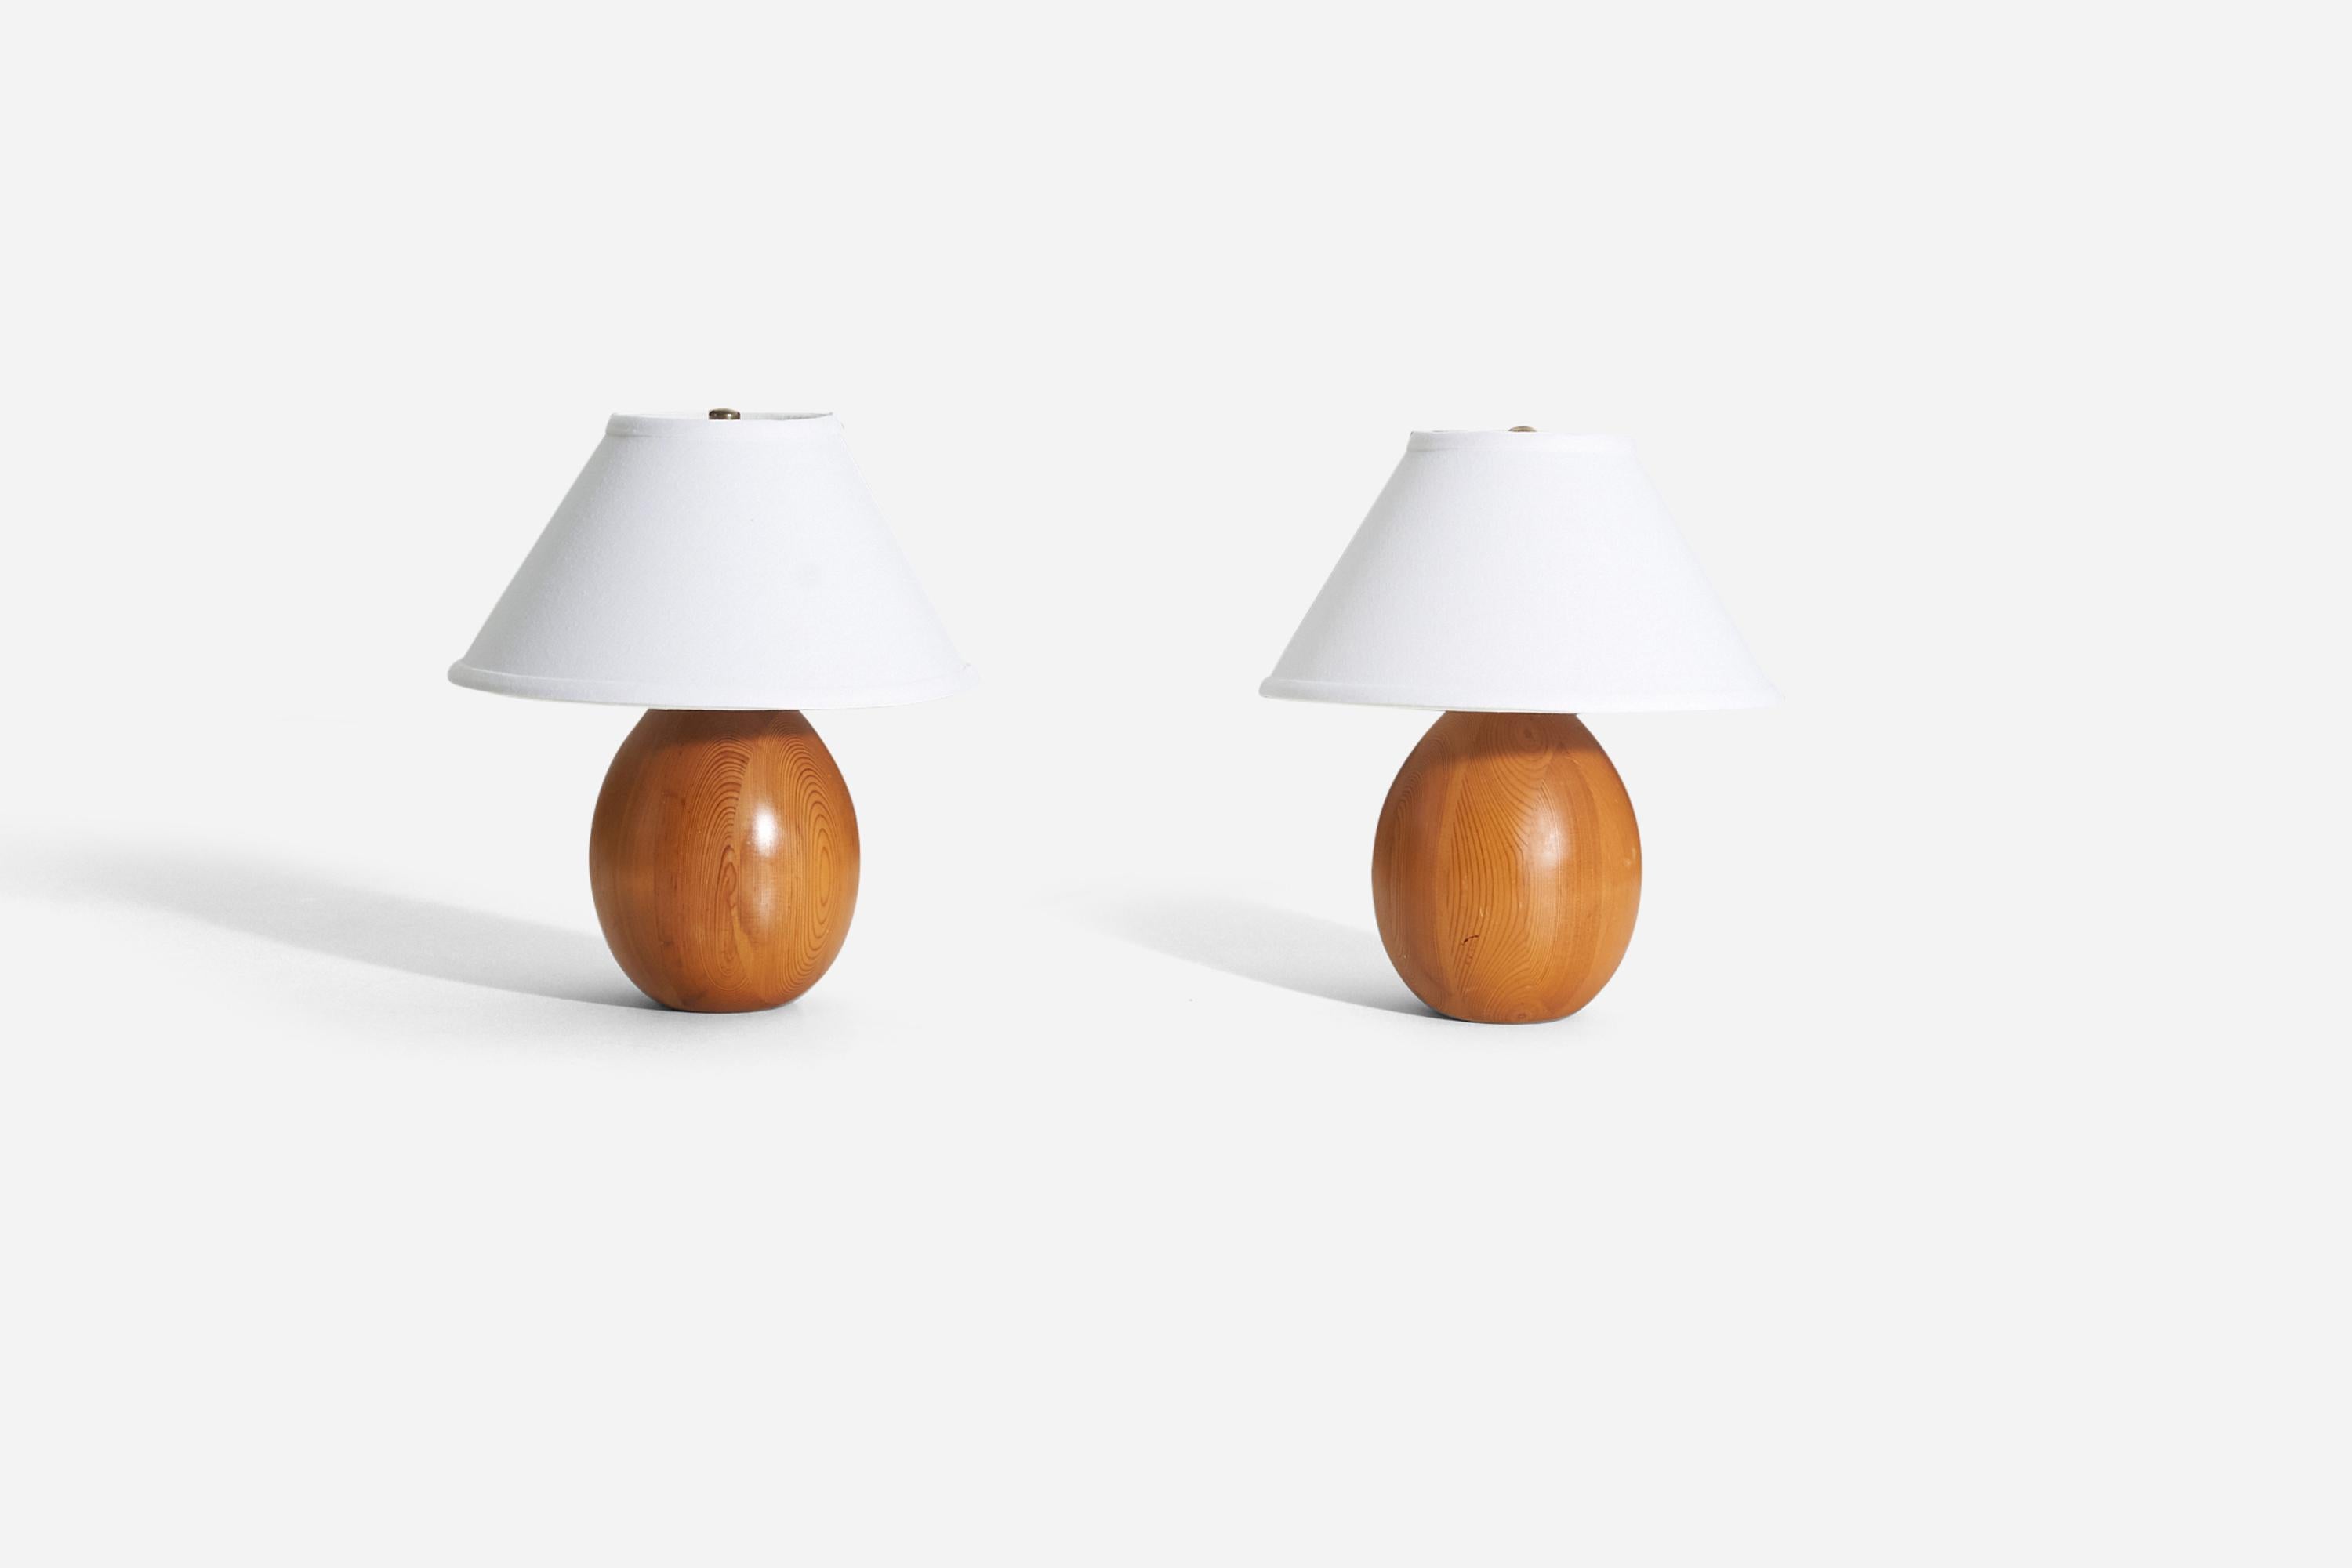 A sculptural solid pine table lamp. Designed by Uno Kristiansson, for Luxus, Sweden, 1970s. Labeled.

Stated dimensions exclude lampshade, height includes socket. 

Dimensions with shade: height is 12 inches, width is 10.25 inches.
Dimensions